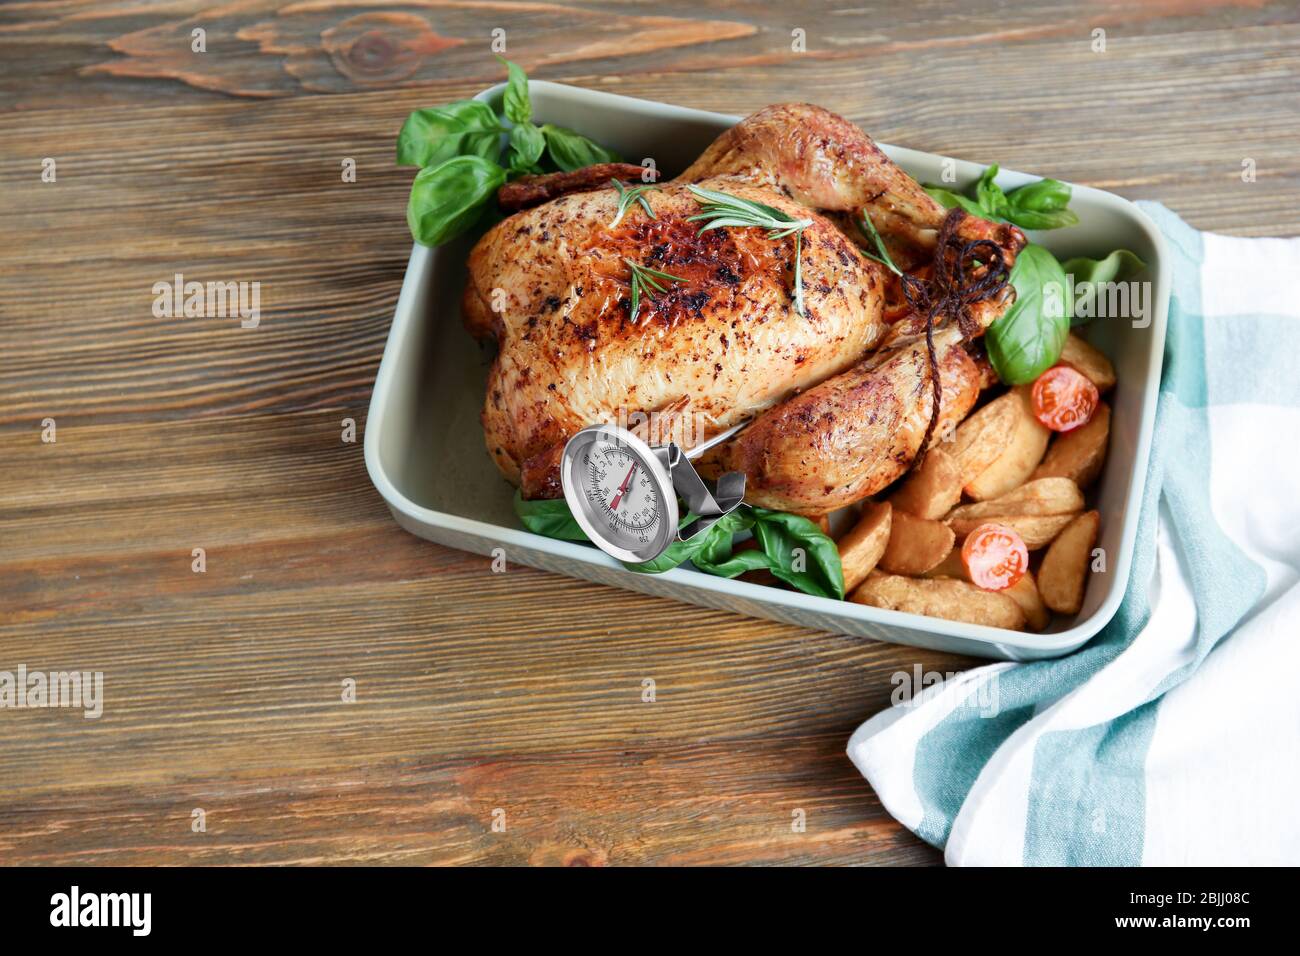 https://c8.alamy.com/comp/2BJJ08C/golden-roasted-turkey-with-meat-thermometer-on-table-2BJJ08C.jpg